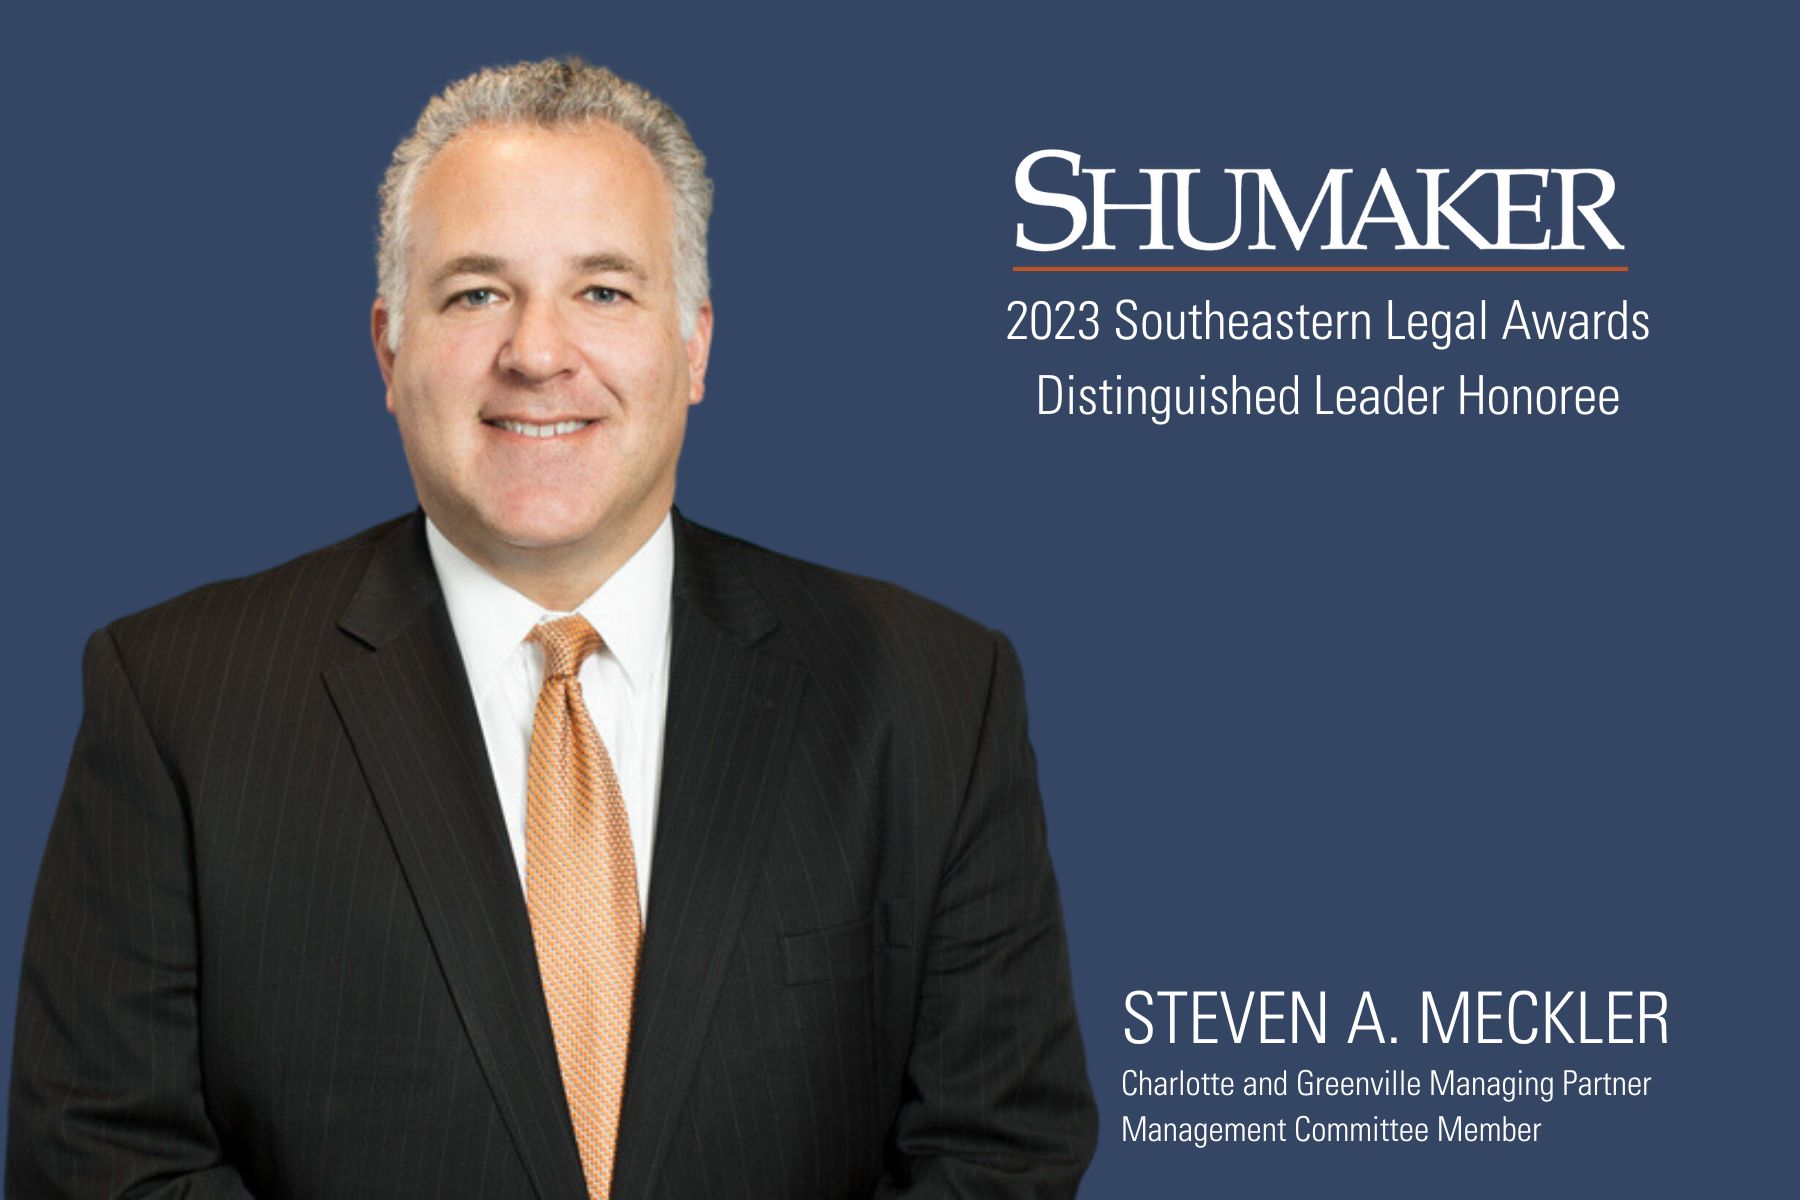 Steven A. Meckler Recognized as Honoree for the 2023 Southeastern Legal Awards